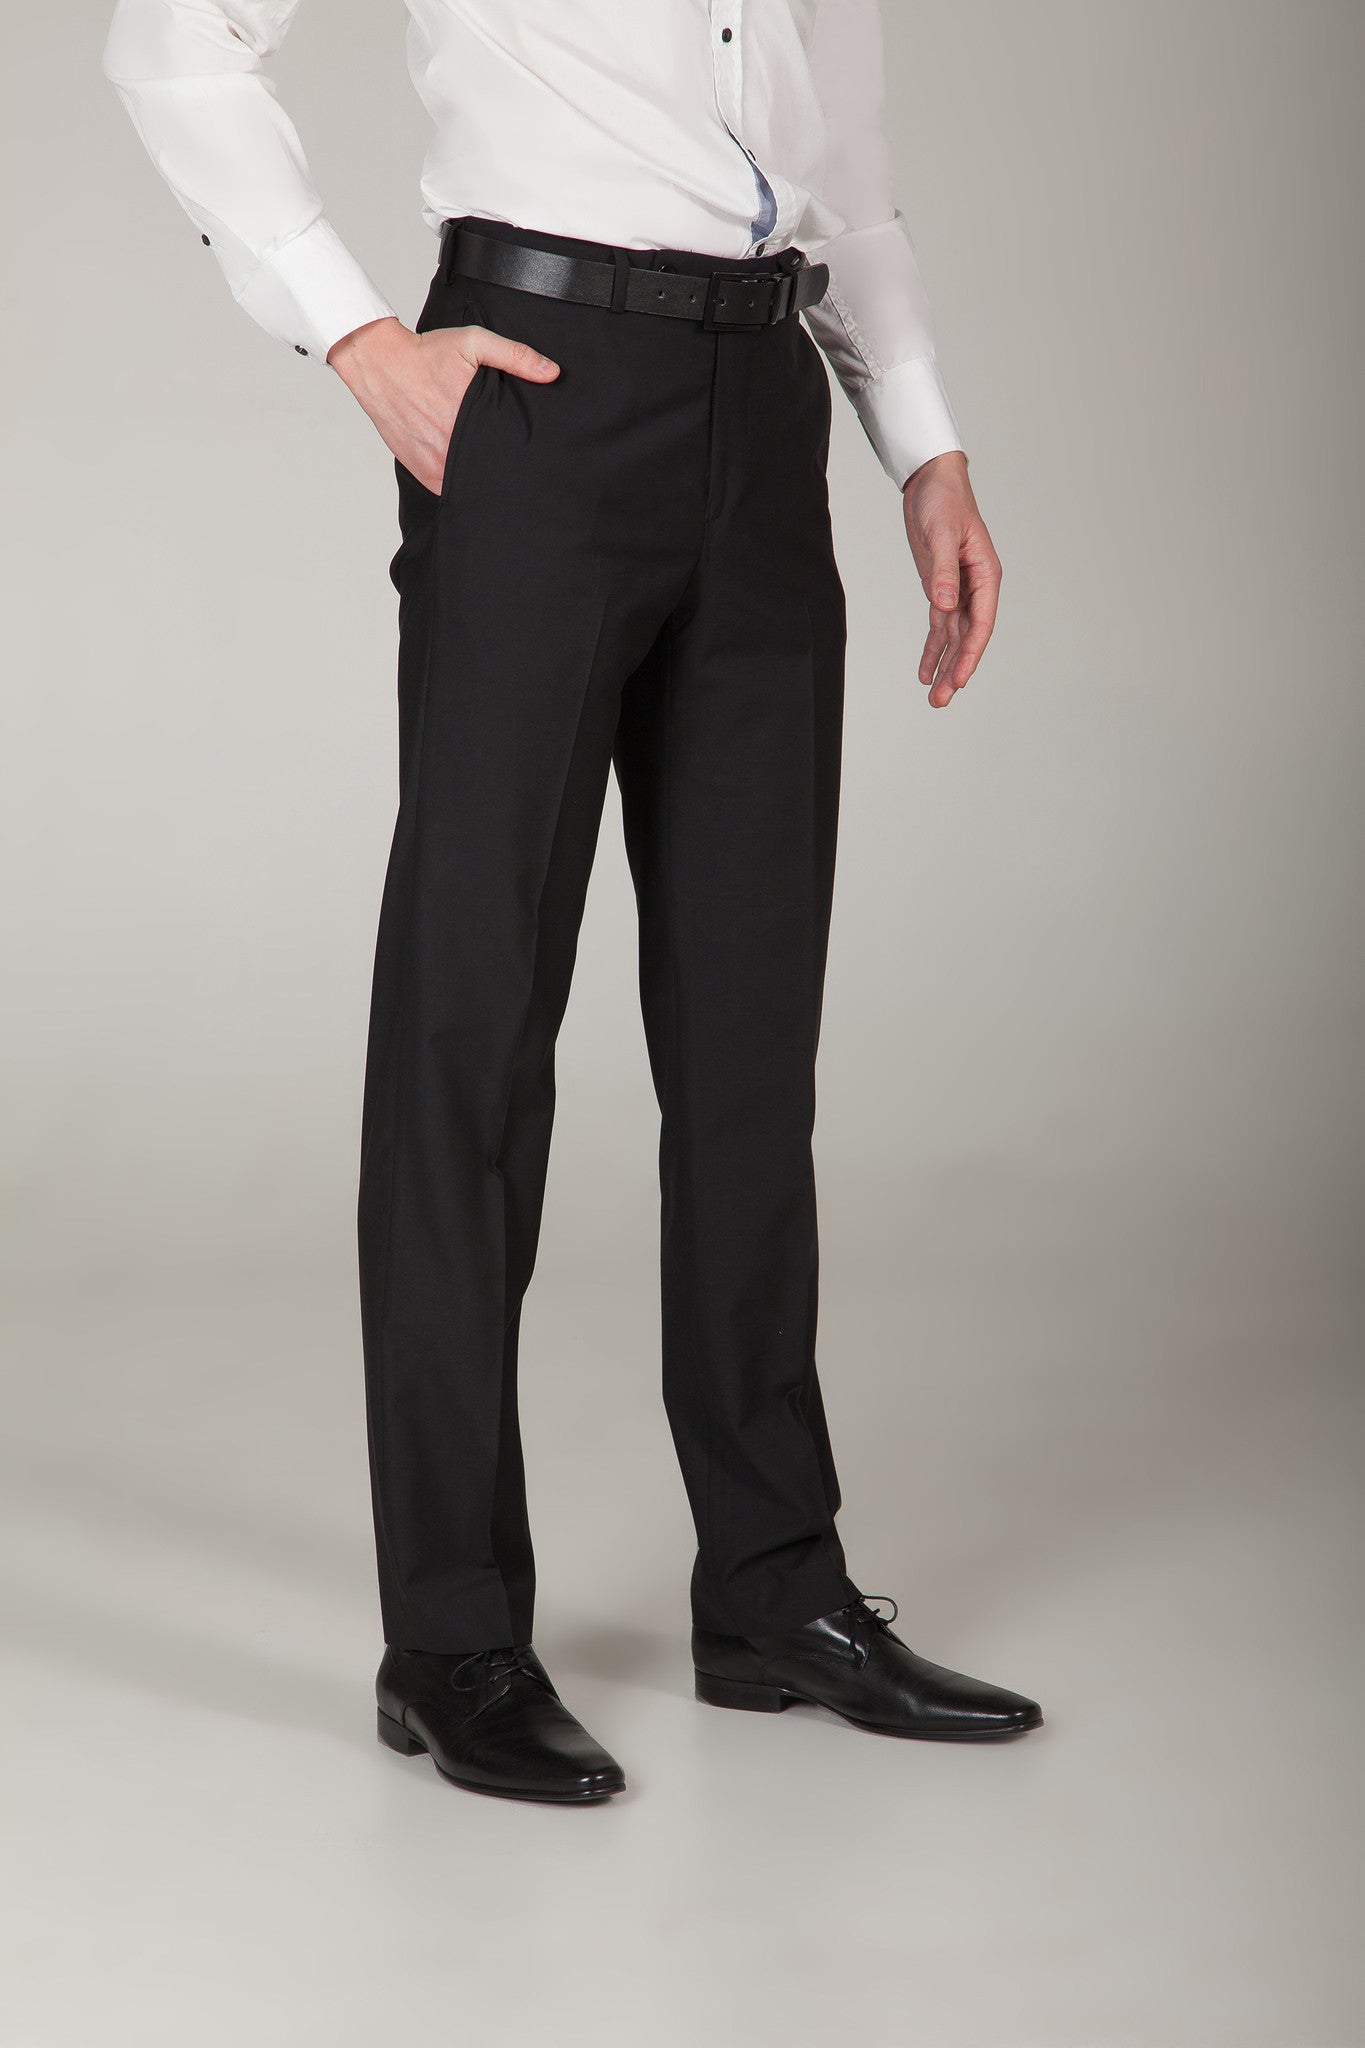 Mens Classic Fit Solid Black Flat Front Wool Dress Pants at Amazon Men's  Clothing store